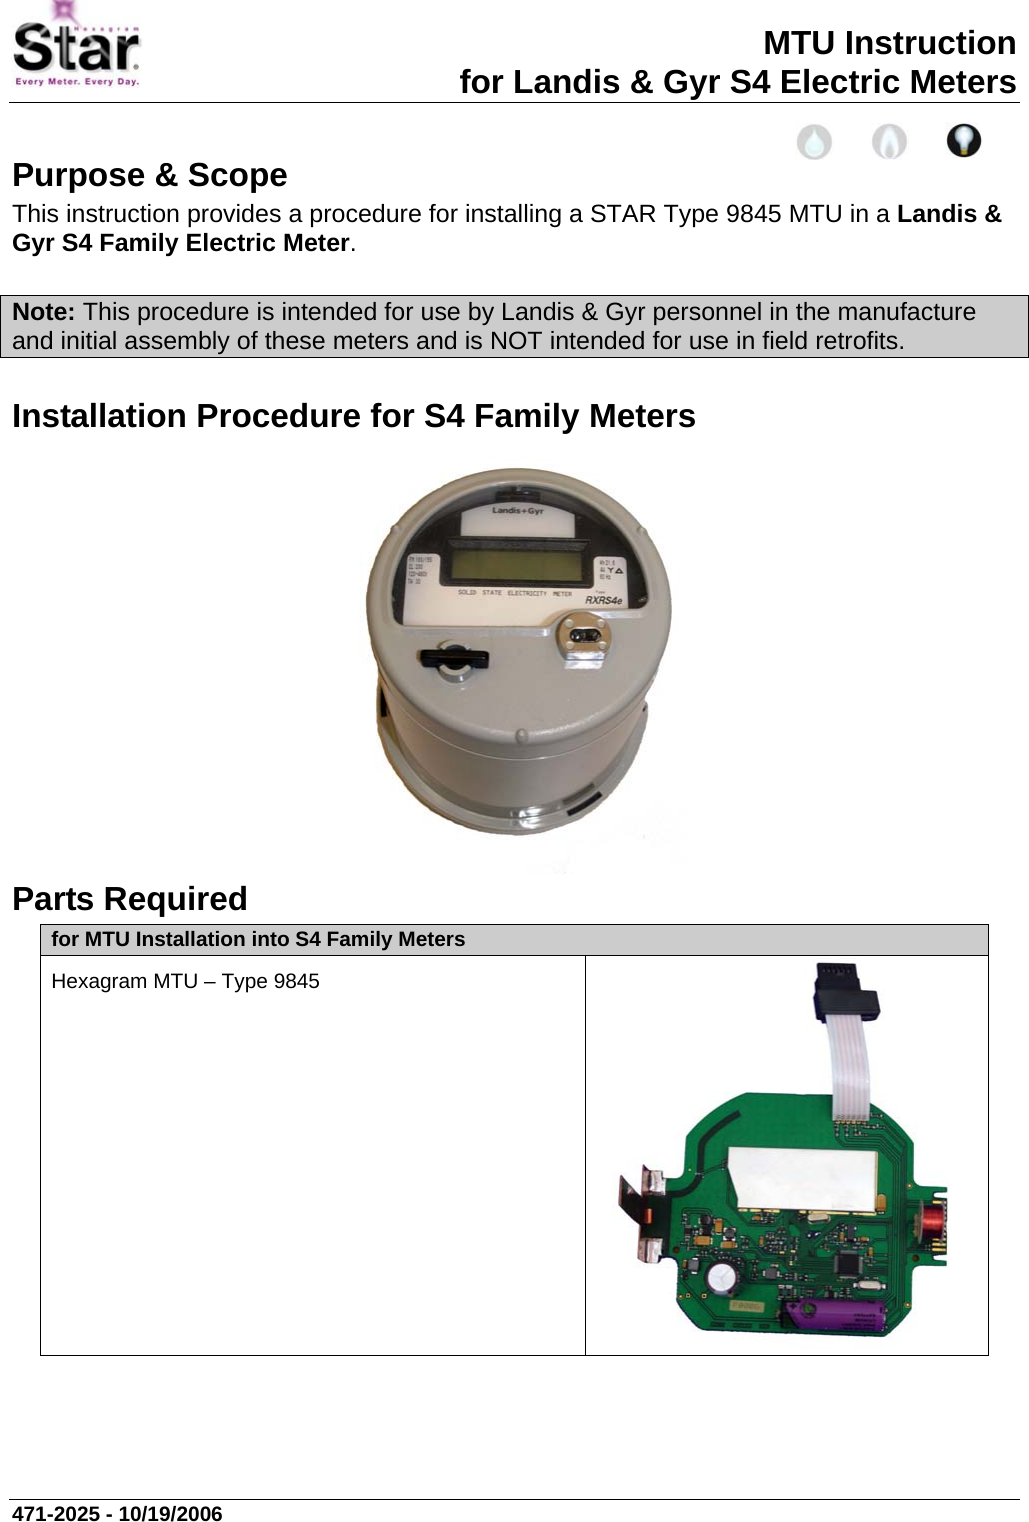 MTU Instruction for Landis &amp; Gyr S4 Electric Meters Purpose &amp; Scope This instruction provides a procedure for installing a STAR Type 9845 MTU in a Landis &amp; Gyr S4 Family Electric Meter.  Note: This procedure is intended for use by Landis &amp; Gyr personnel in the manufacture and initial assembly of these meters and is NOT intended for use in field retrofits. Installation Procedure for S4 Family Meters  Parts Required for MTU Installation into S4 Family Meters Hexagram MTU – Type 9845   471-2025 - 10/19/2006 